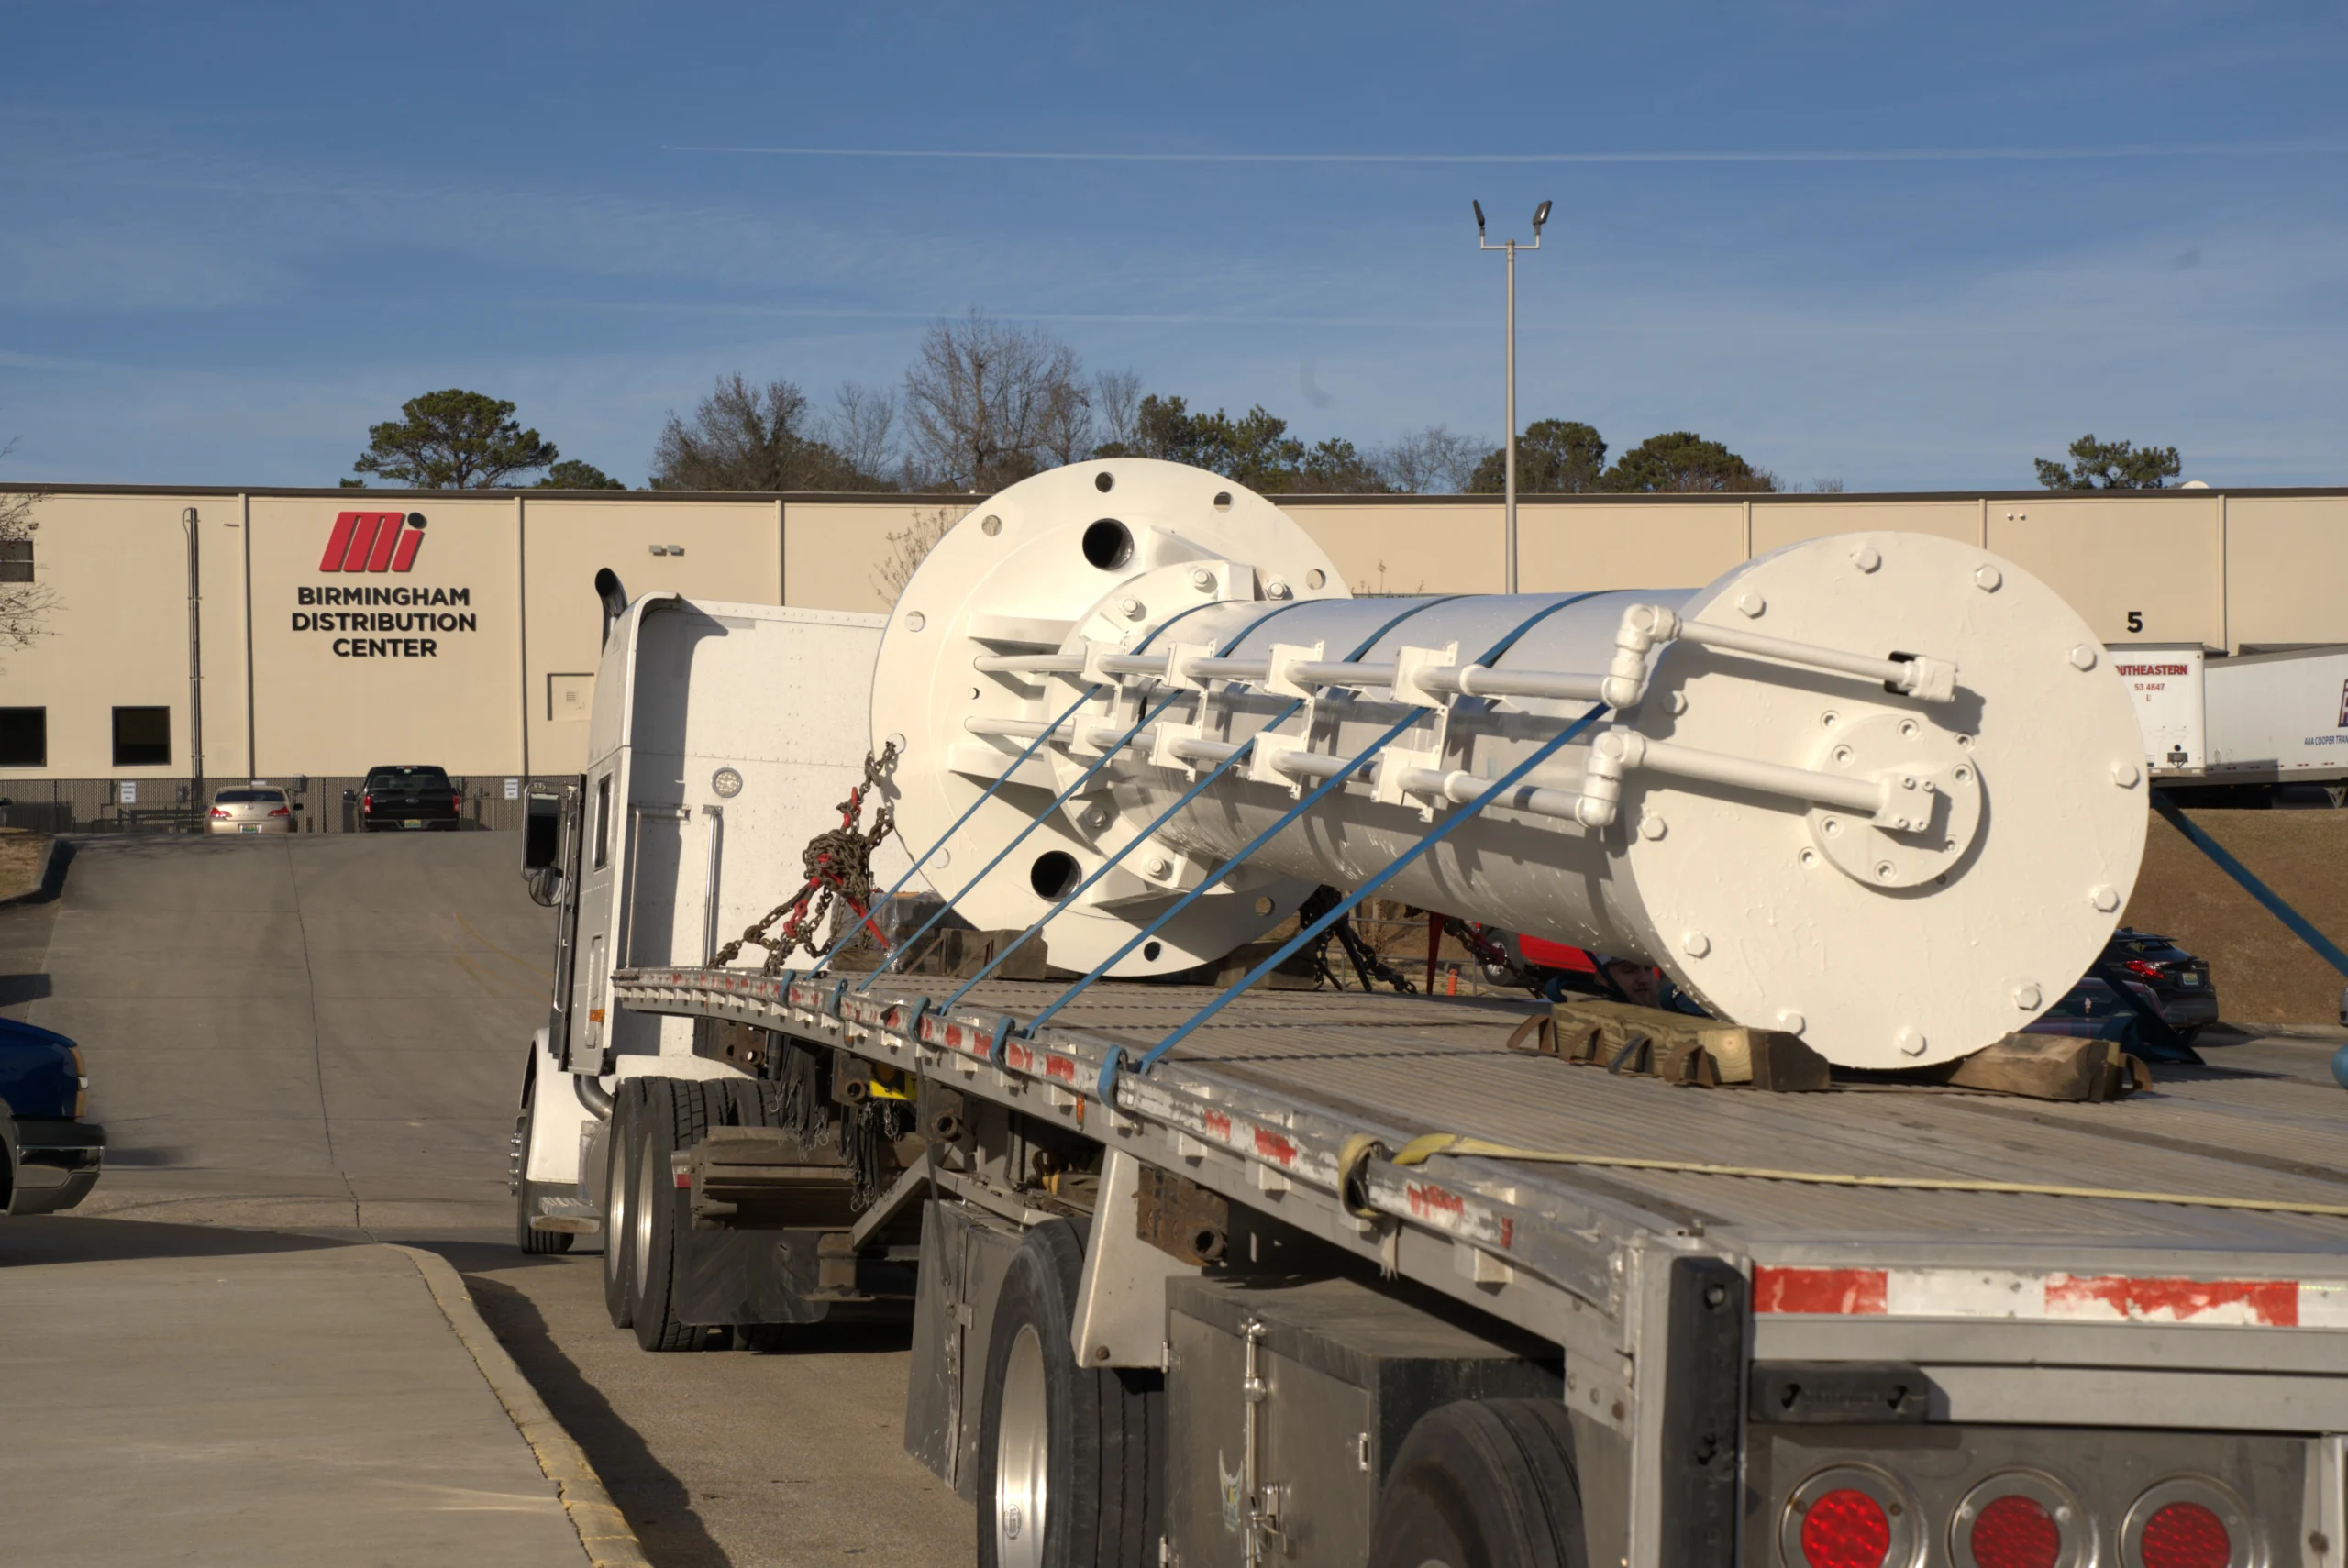 Large remanufactured hydraulic metal shaft painted white, loaded on tracker trailer at Motion's Birmingham Distribution Center with blue skies in the background